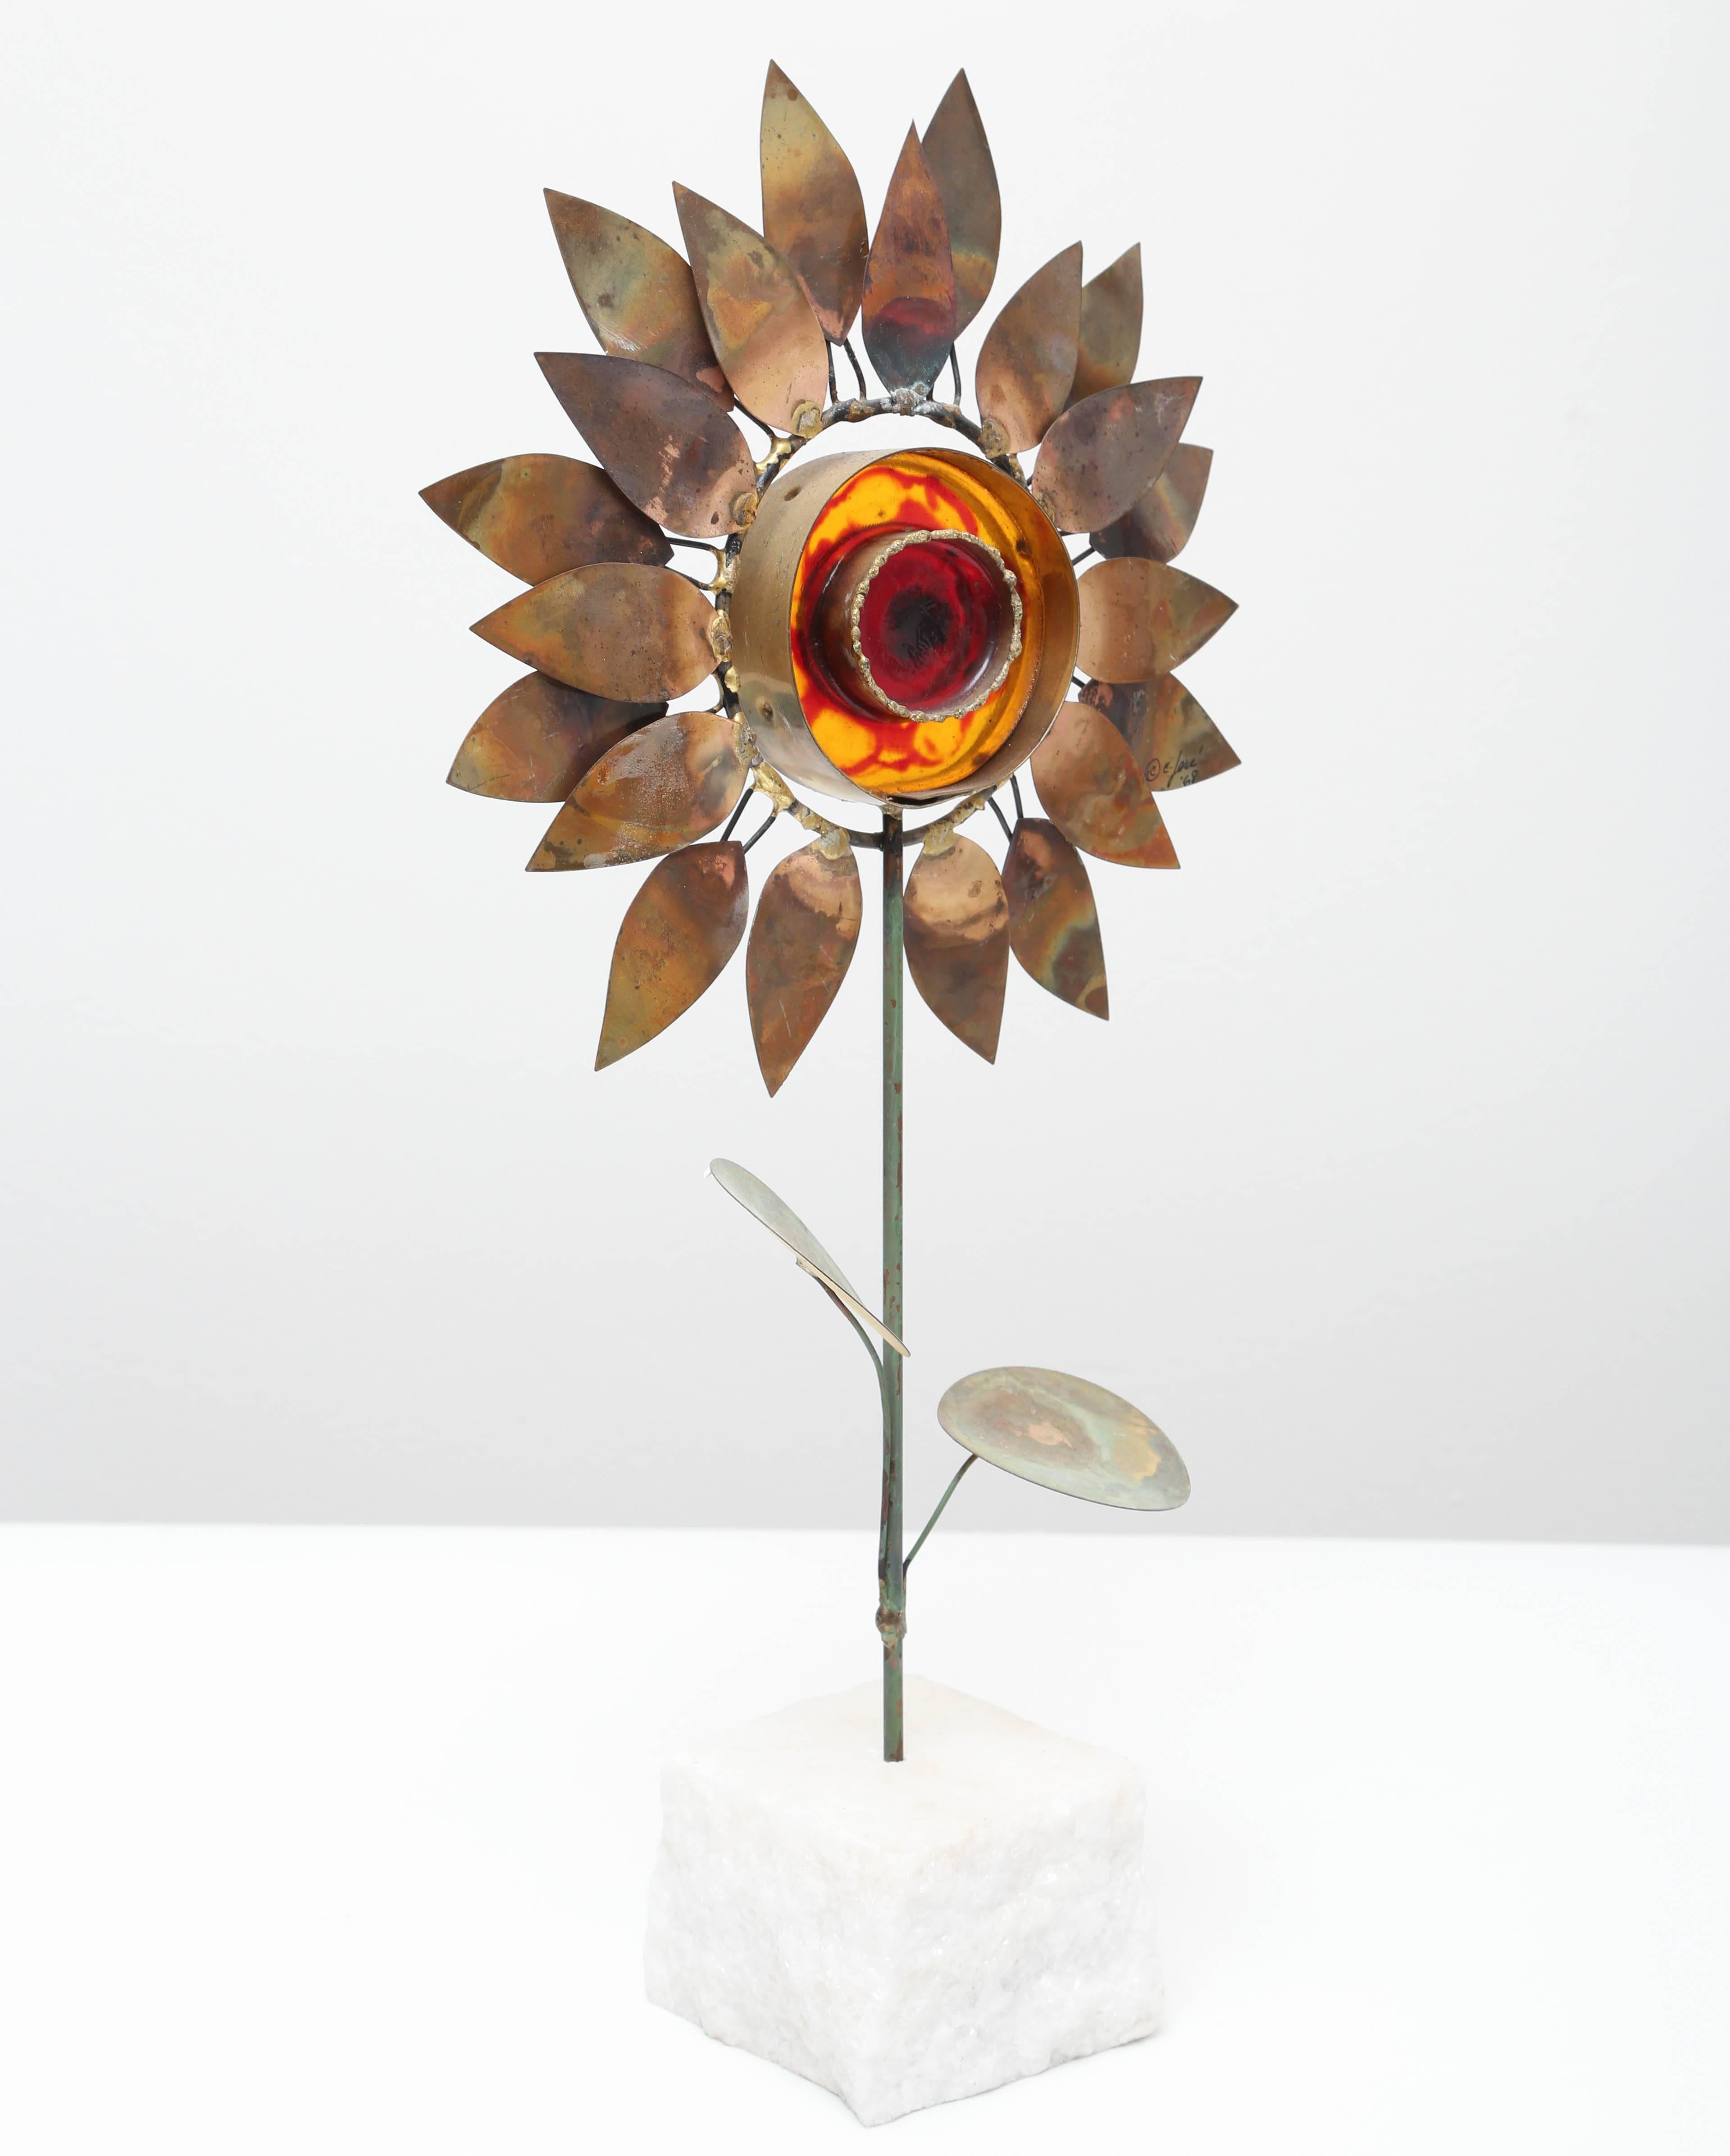 Signed on one of the leaves: C. Jere 1968

Curtis Jere was a California artist collaborative founded by Curtis Freiler and Jerry Fees in the early 1960s. Their decorative work from the 1960s features torched, crimped, welded and shaped metal which